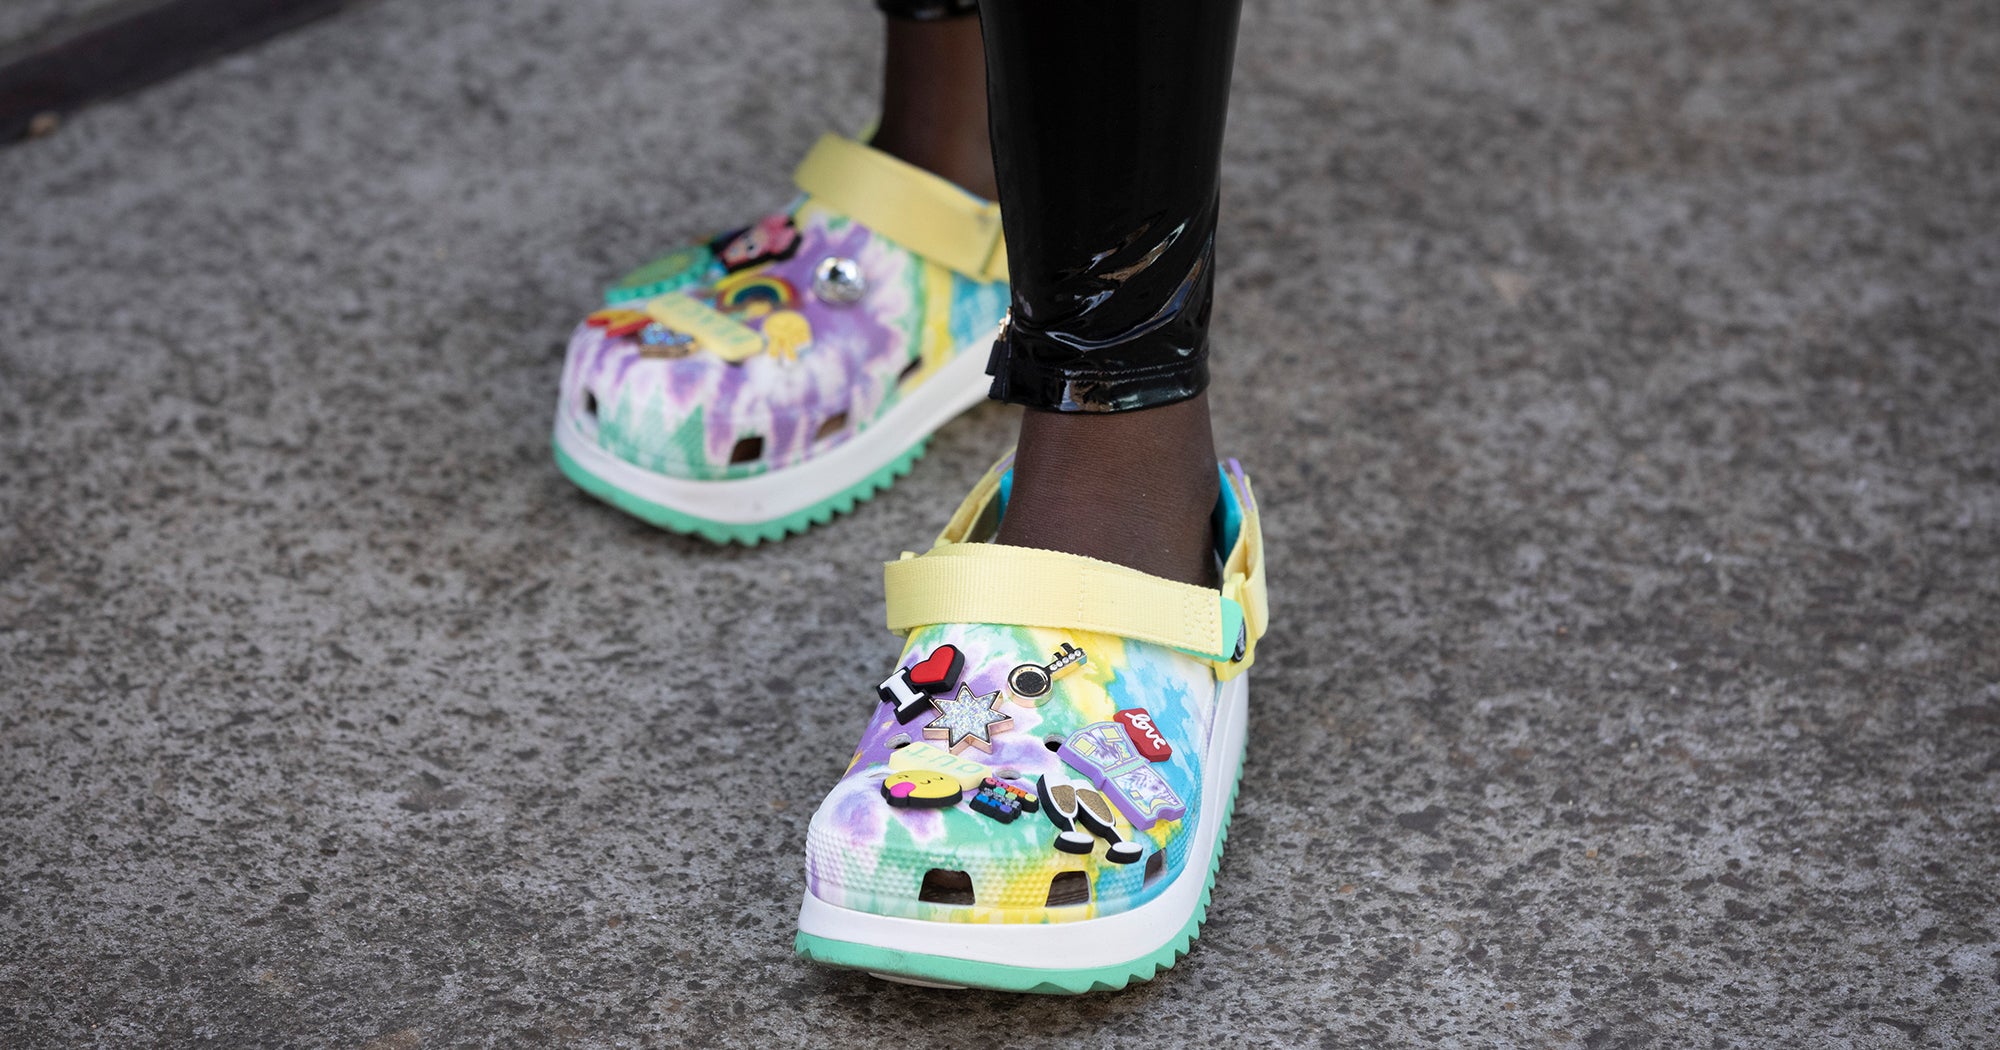 Brace Yourself, It's the Next Ugly Shoe Trend